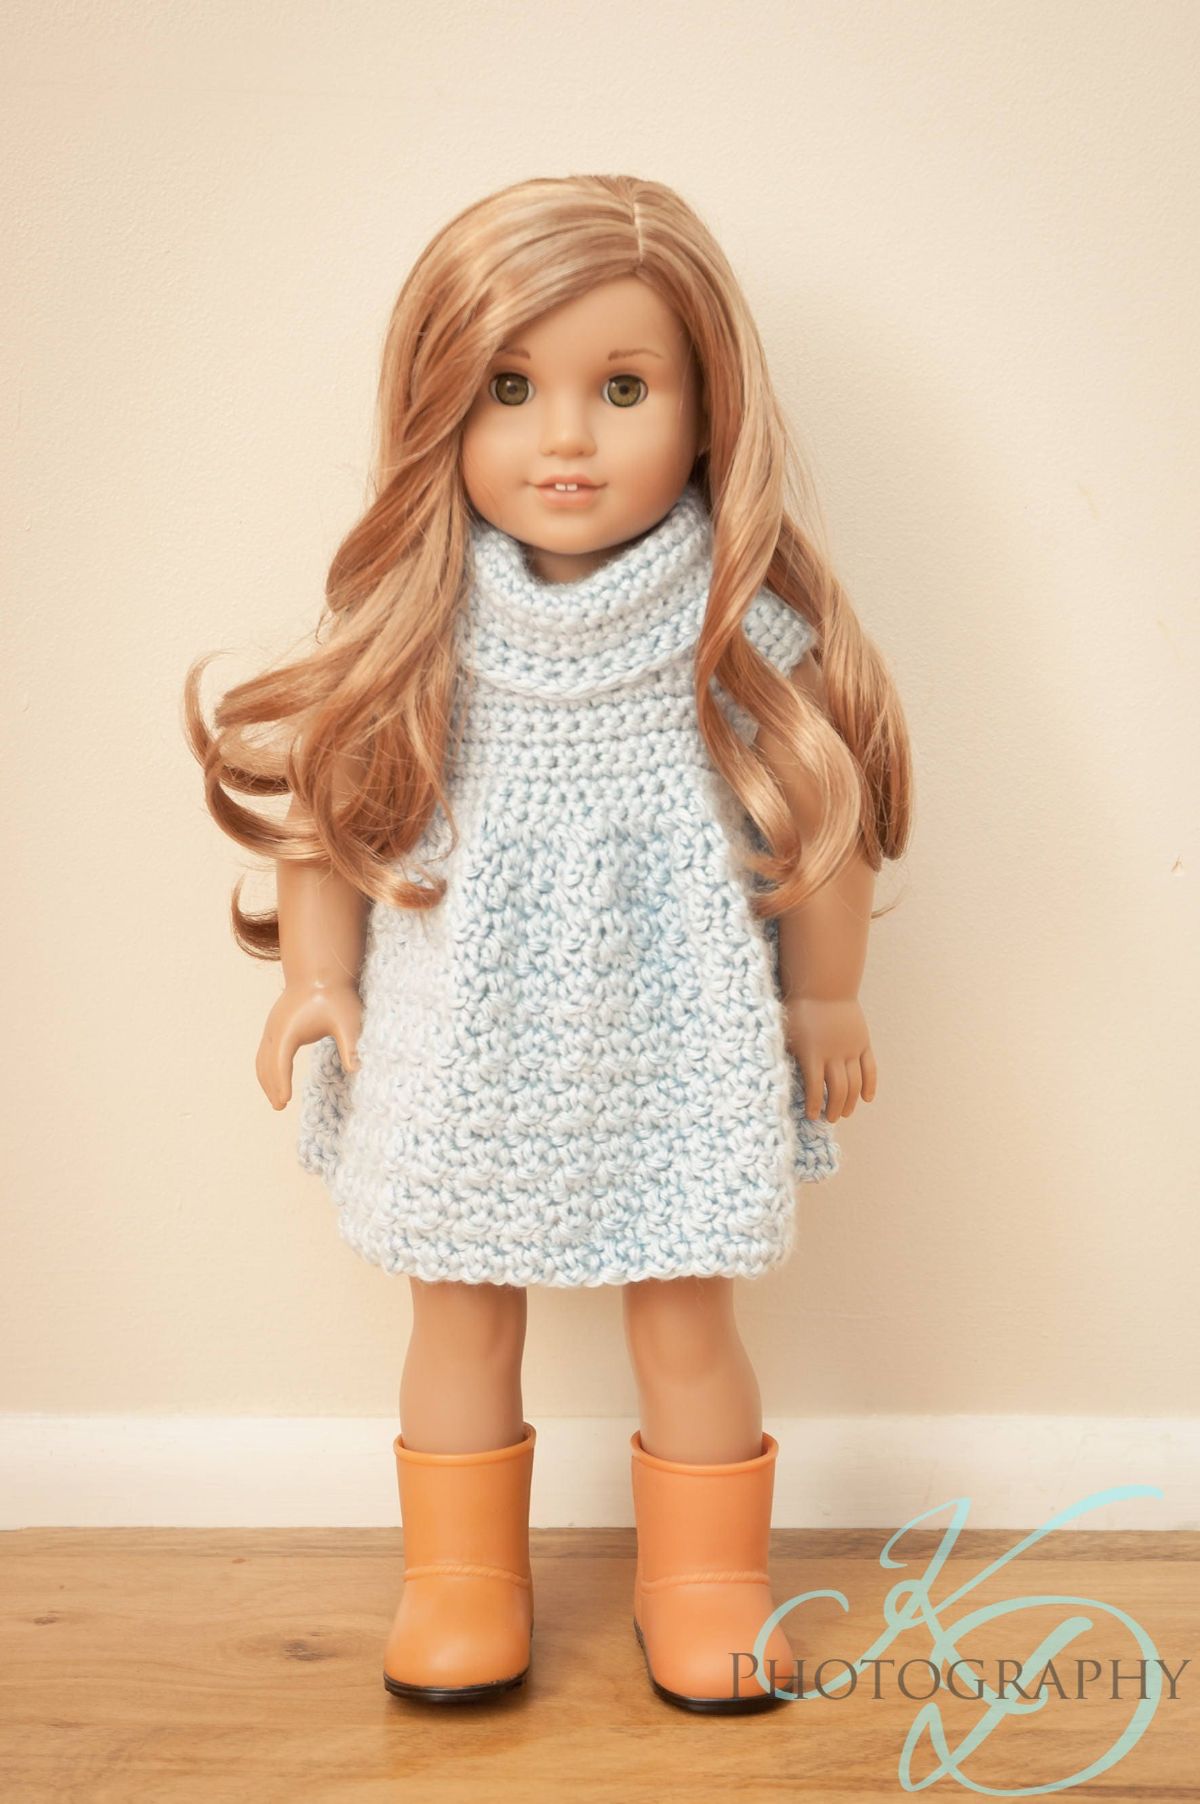 Blonde doll wearing a sleeveless crochet sweater dress with a high roll neck and peach boots.